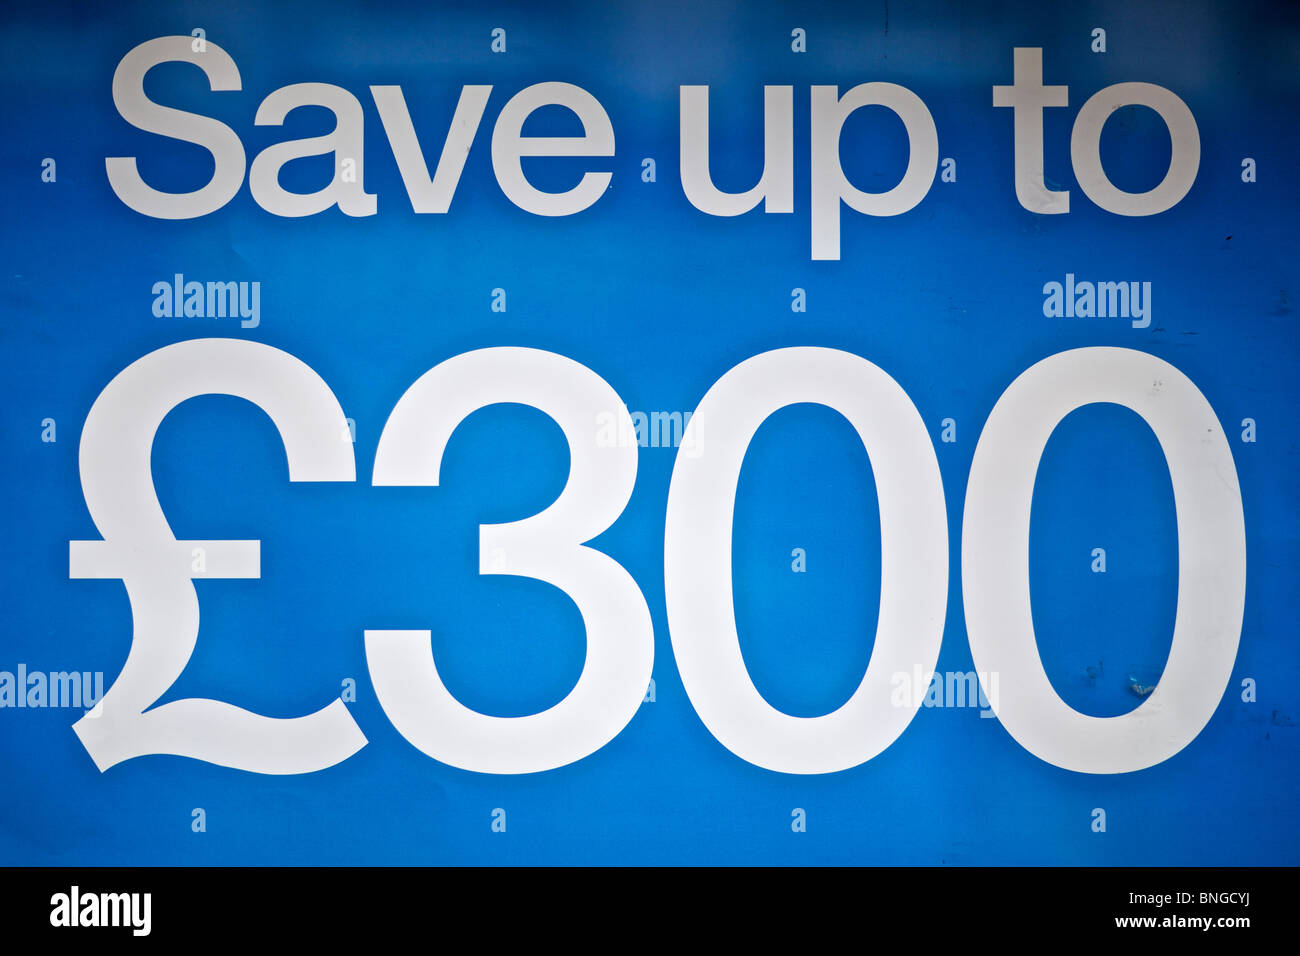 Save up to £300 poster in shop window on High Street Stock Photo